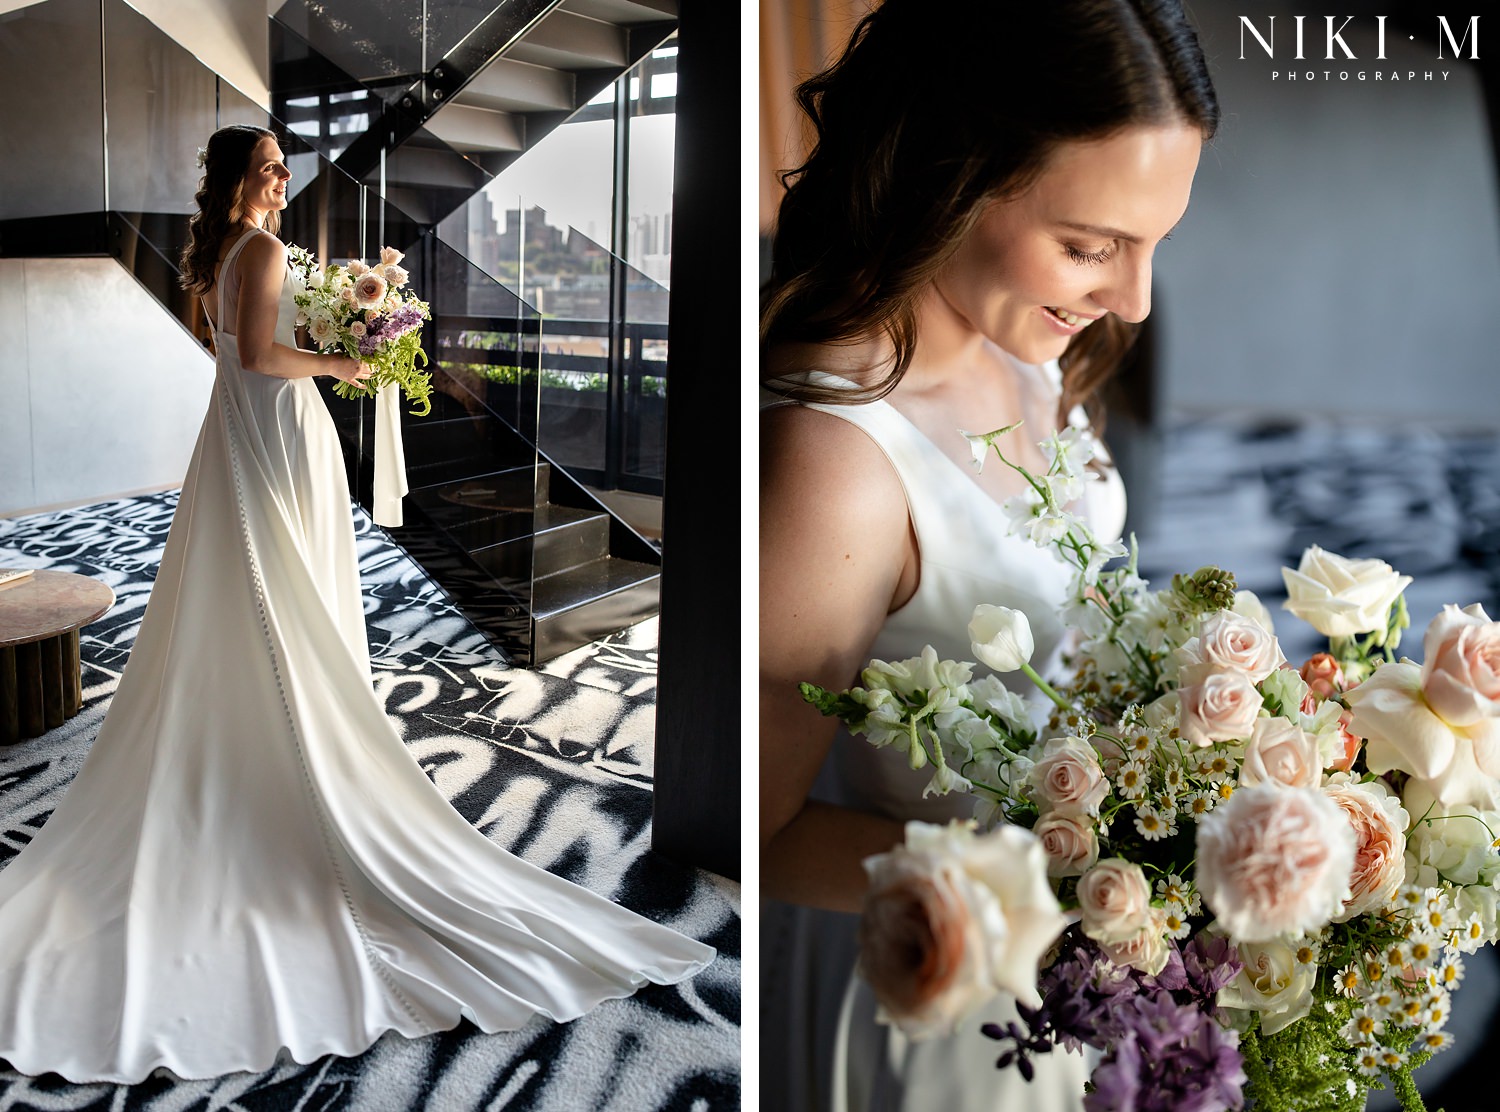 Bridal portraits in the Hallmark House penthouse suite before her Johannesburg wedding